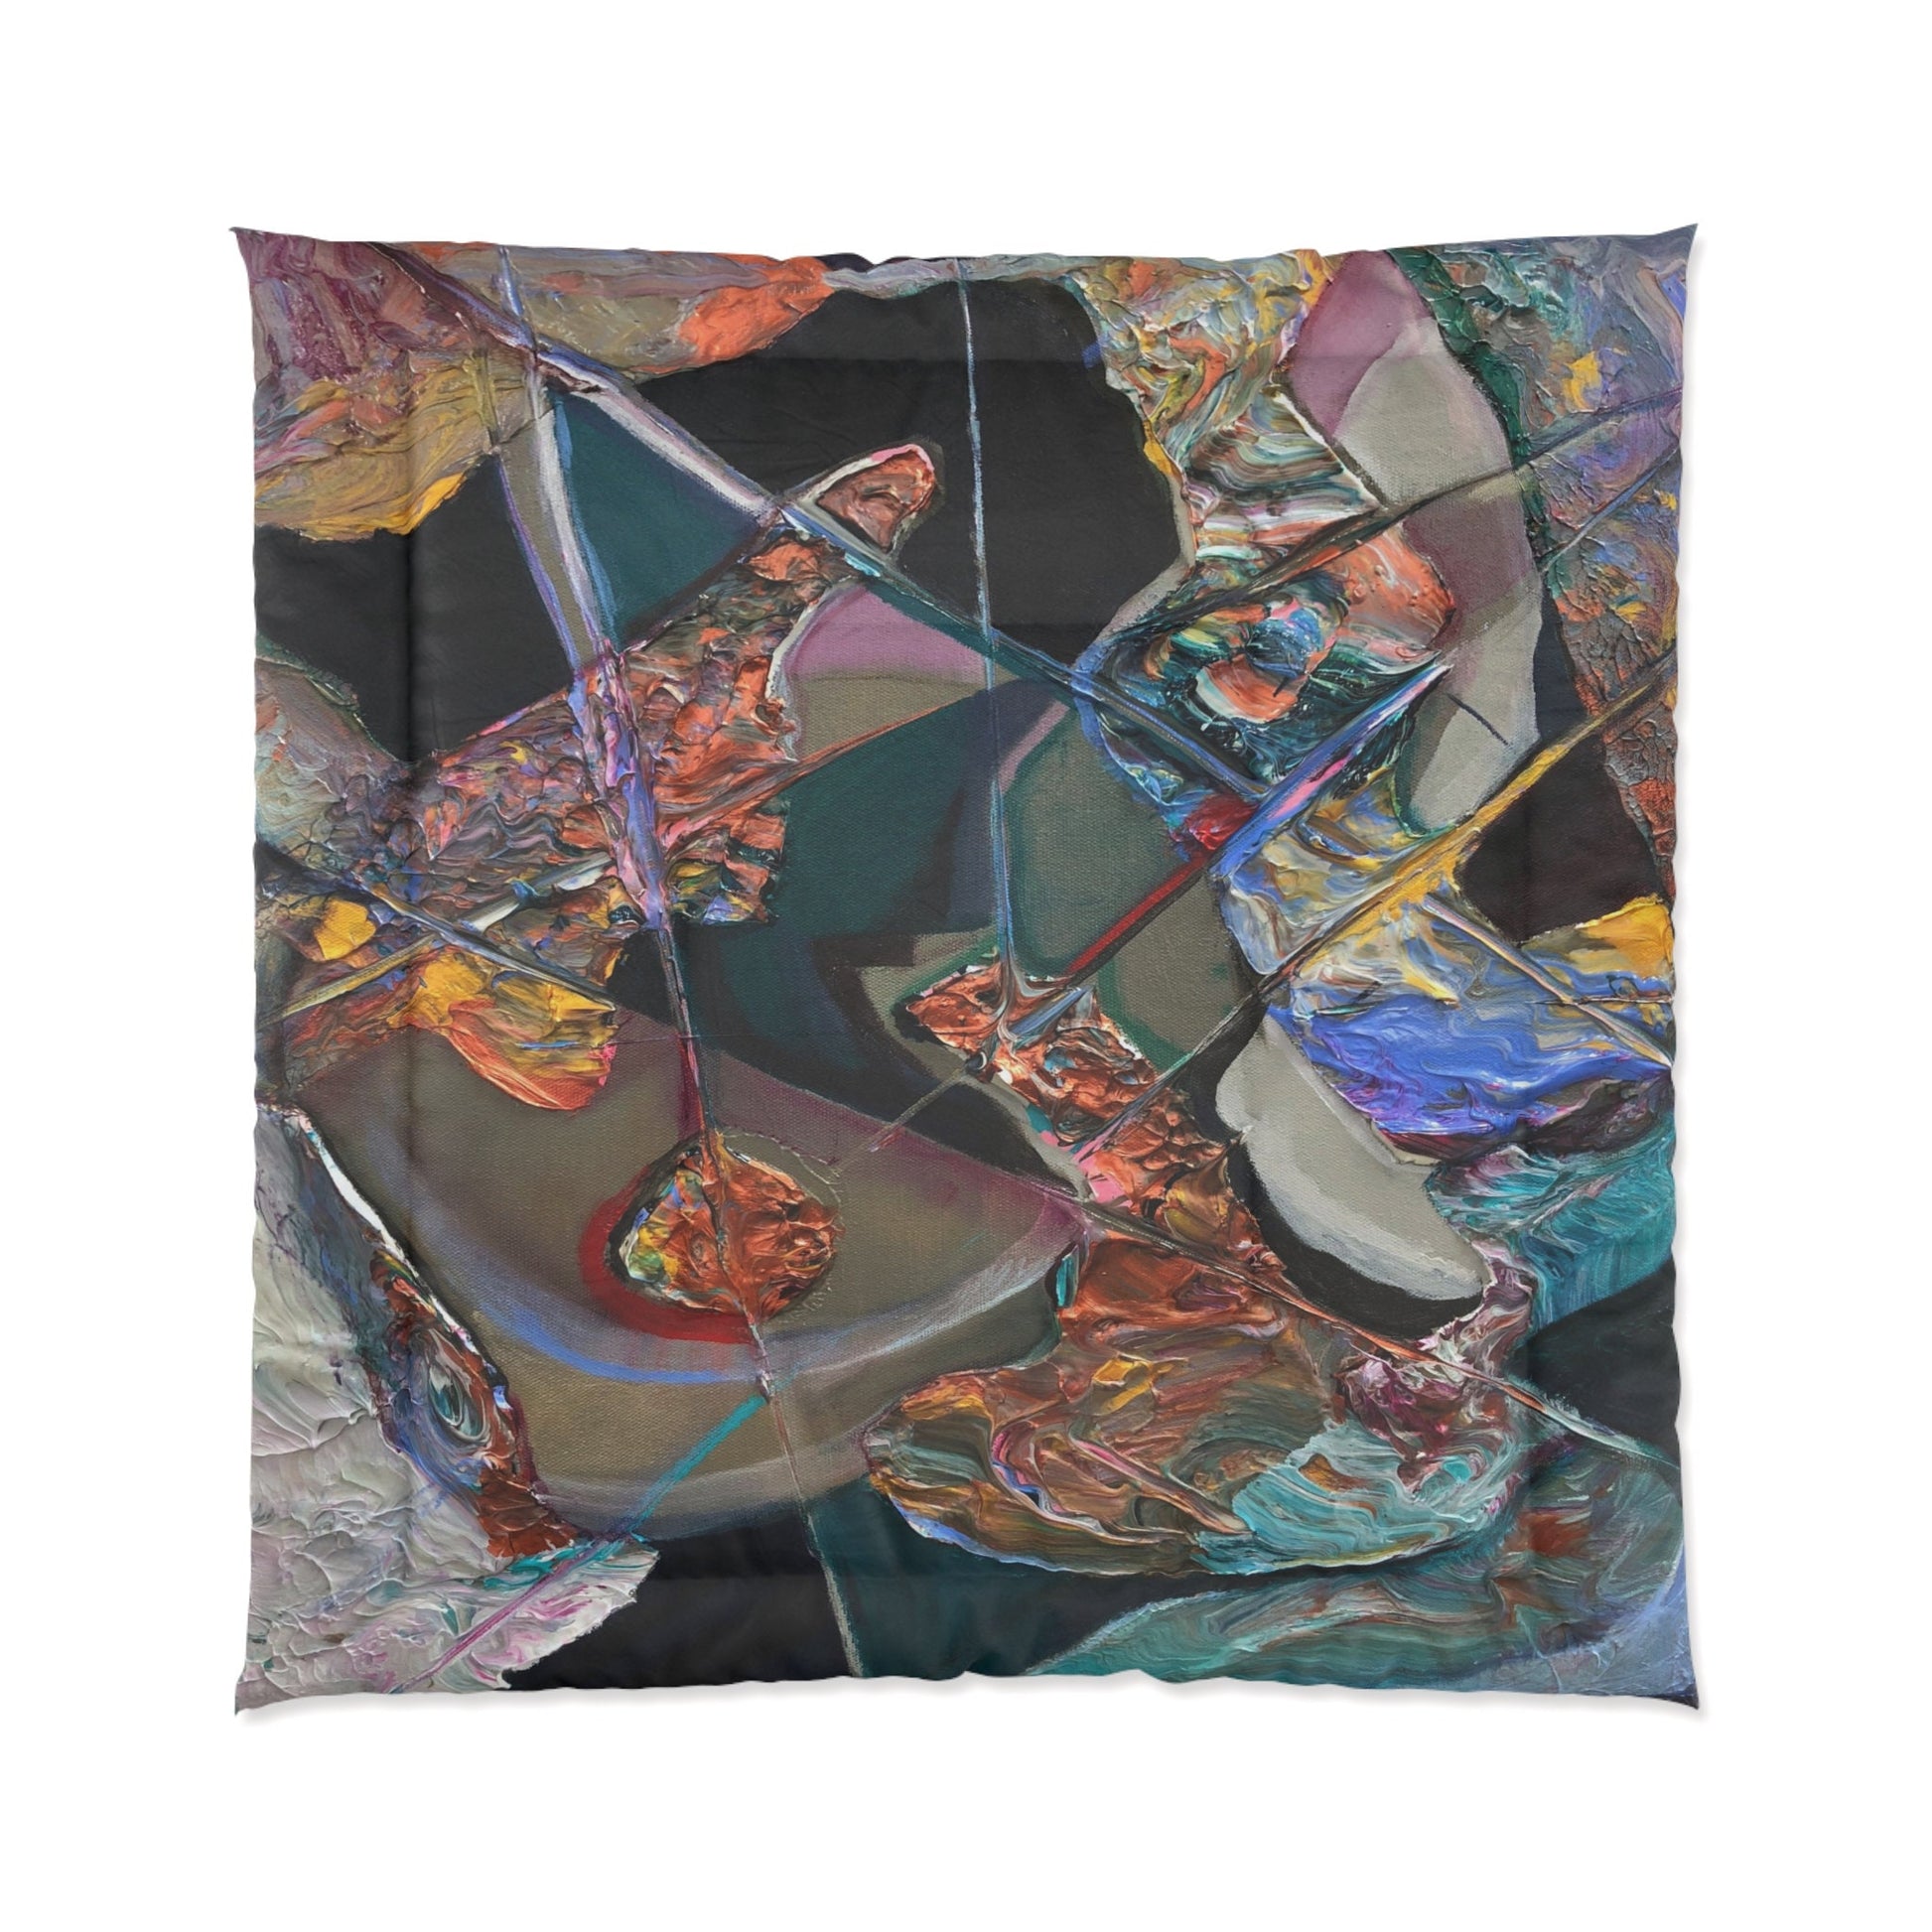 Abstract Art Duvet Cover or Comforter Artsy Colorful bedding Twin Queen King pillowcases black orange blue yellow artwork colorful bed sets